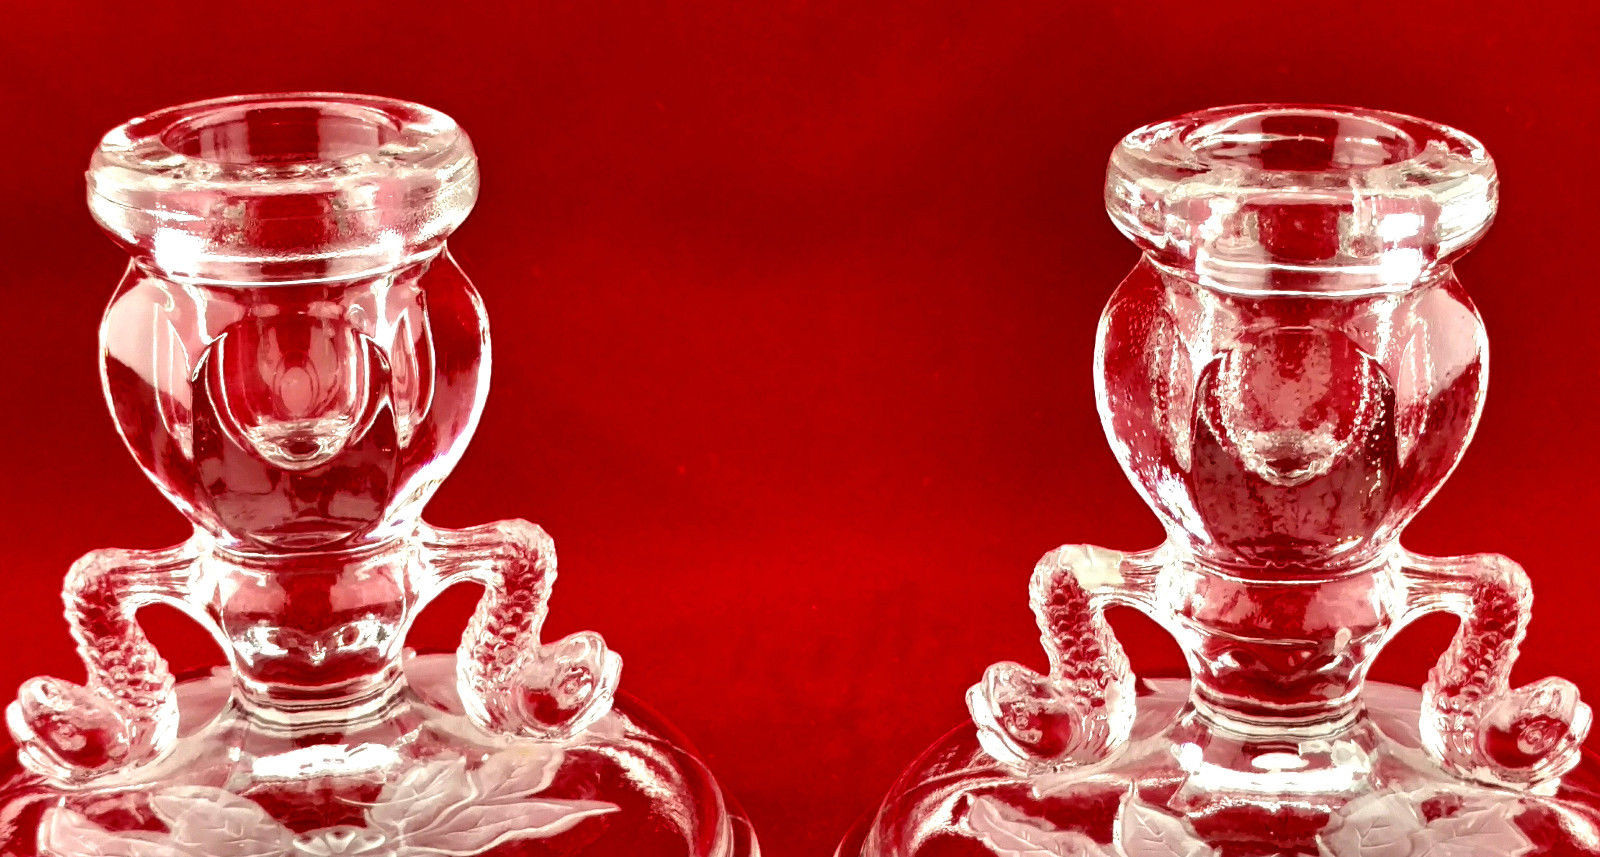 20 attractive Fenton Red Hobnail Vase 2024 free download fenton red hobnail vase of vintage fenton crystal clear dolphin candlestick holders 1927 1937 throughout 4 of 8 vintage fenton crystal clear dolphin candlestick holders 1927 1937 set of 4 5 